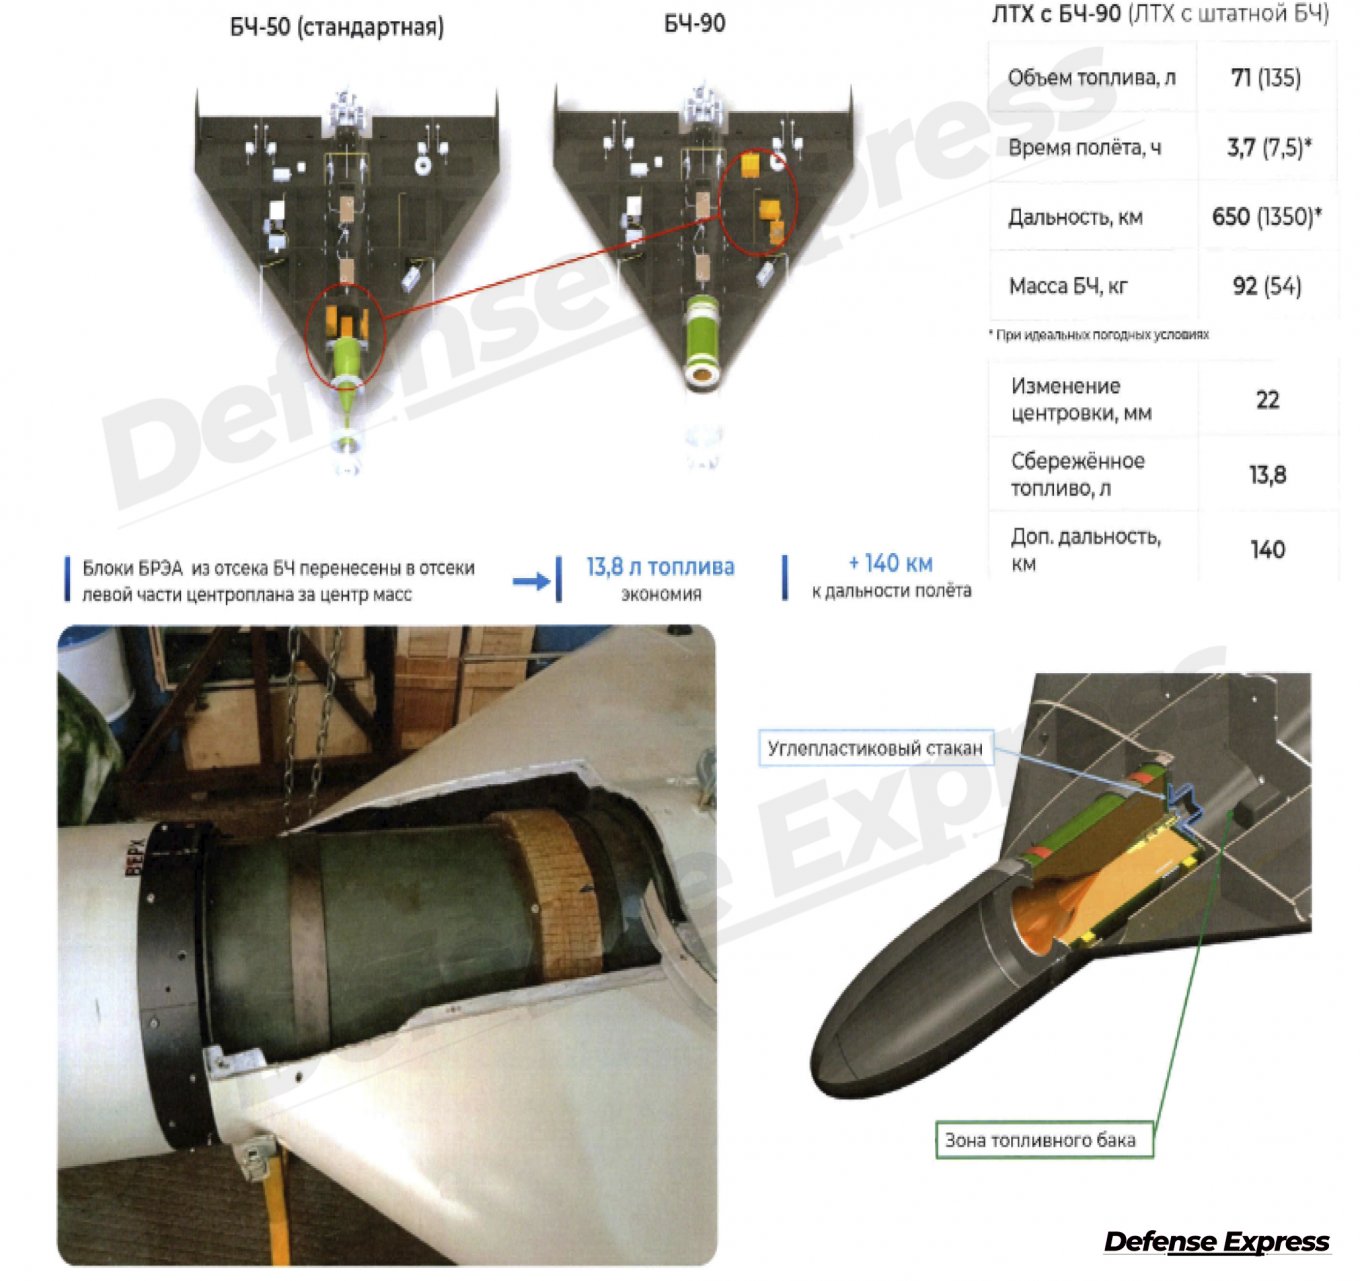 New BCh-90 warhead for Shahed-136 / Defense Express / Shahed-136's New 90-kg Warhead and Other Findings of the Alabuga Data Leak